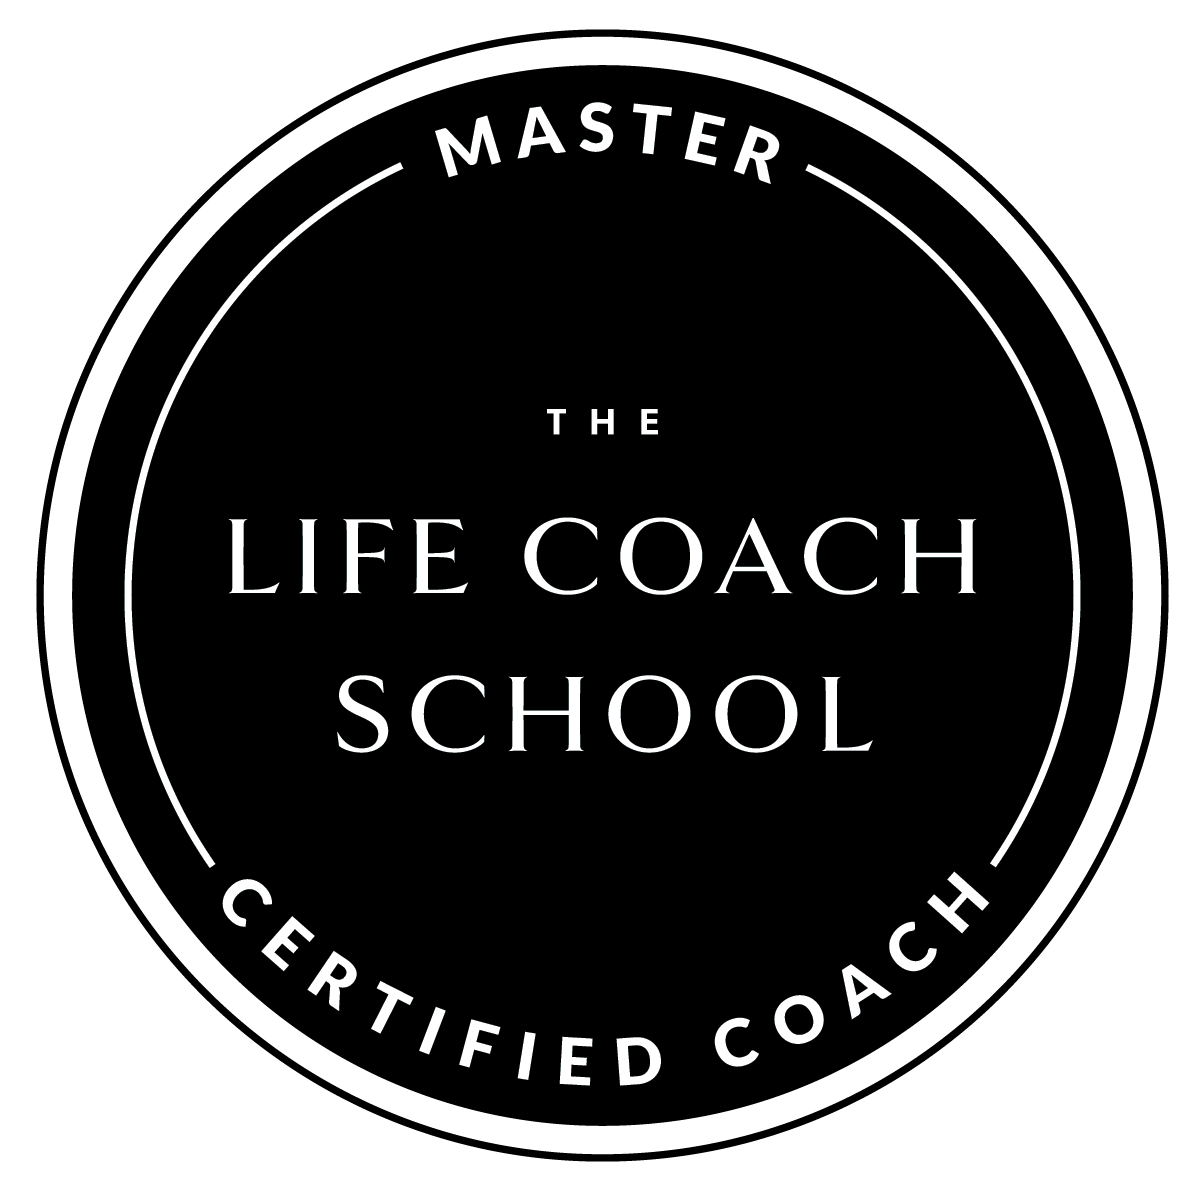 the life coach school, master certified coach for lawyers, master certified life coach, life coach for lawyers, best life coach for lawyers, best lawyer coach, Dina Cataldo, how to be a better lawyer